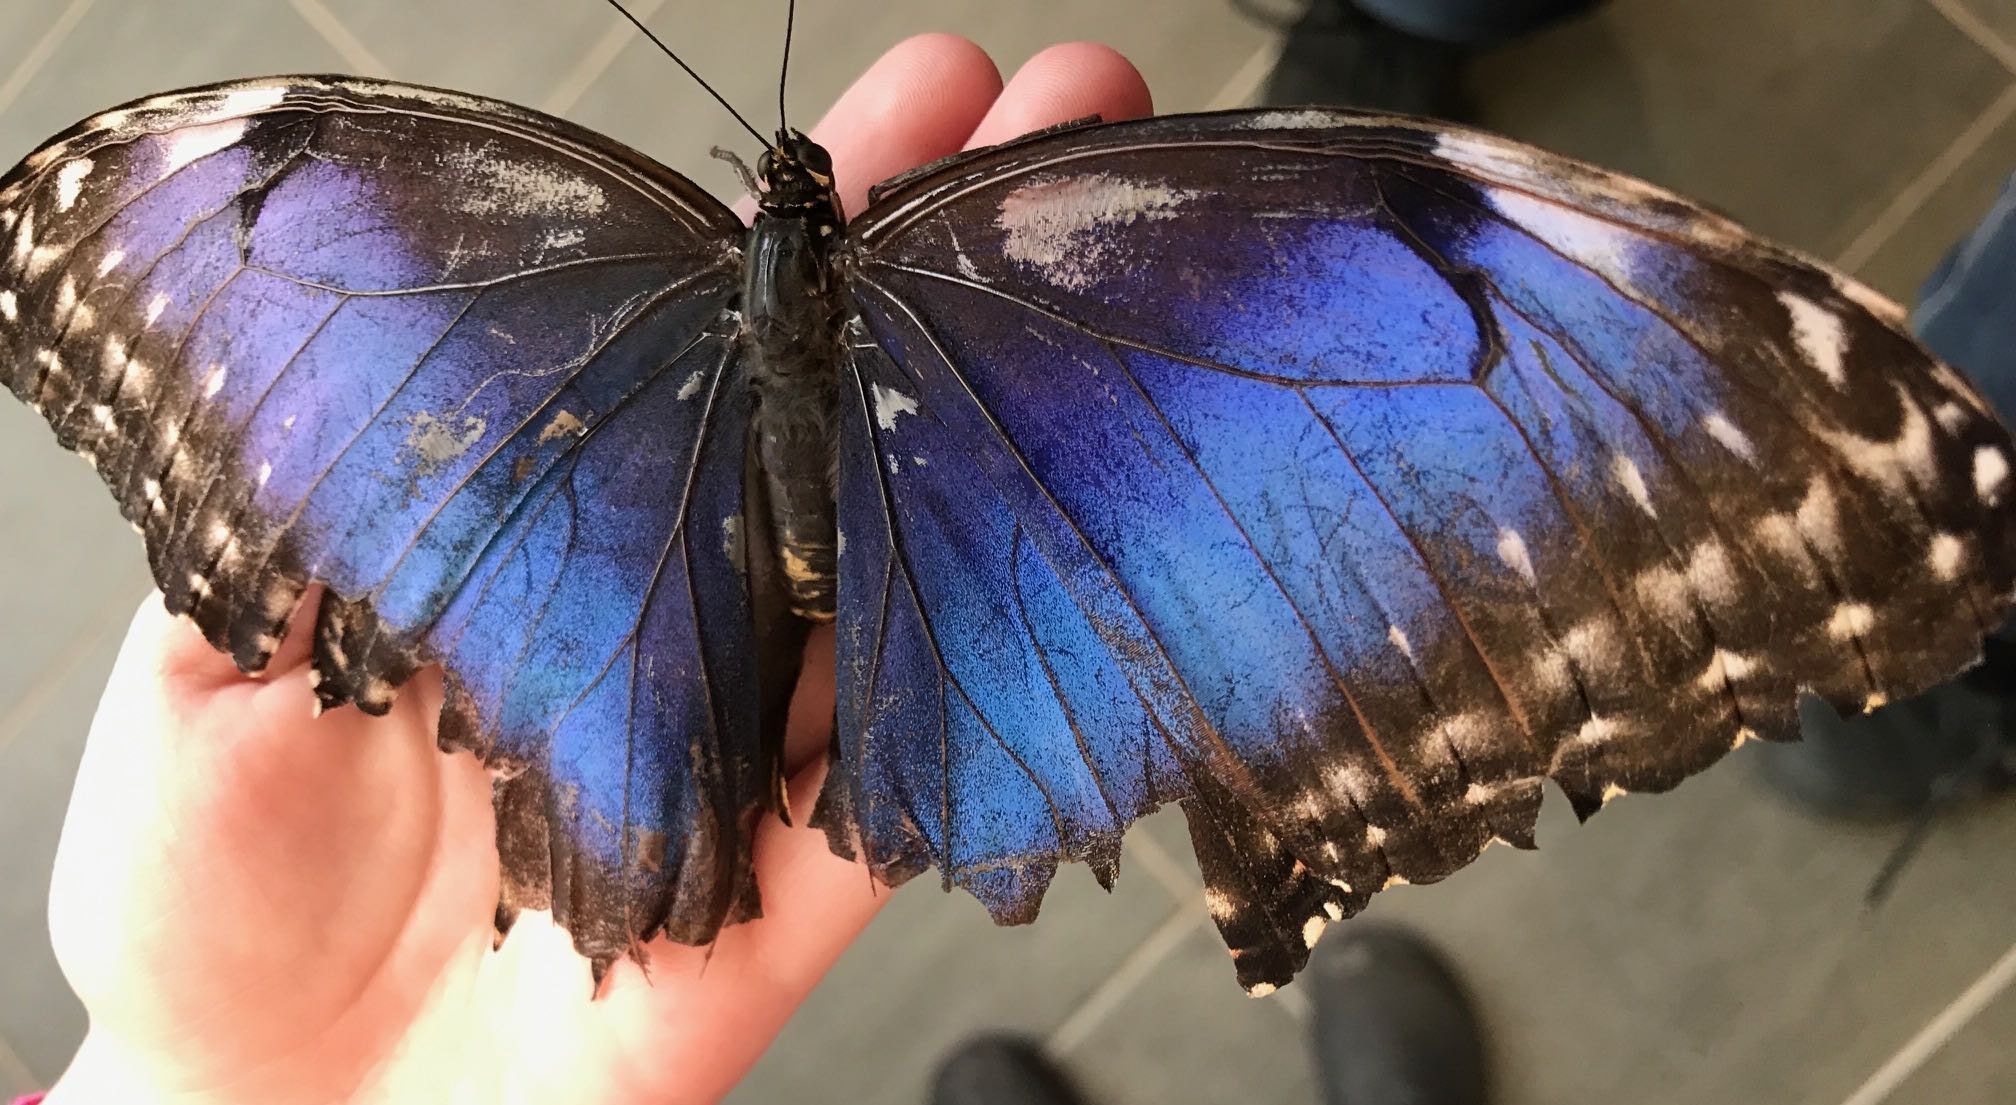 Hand holding a ragged blue butterfly